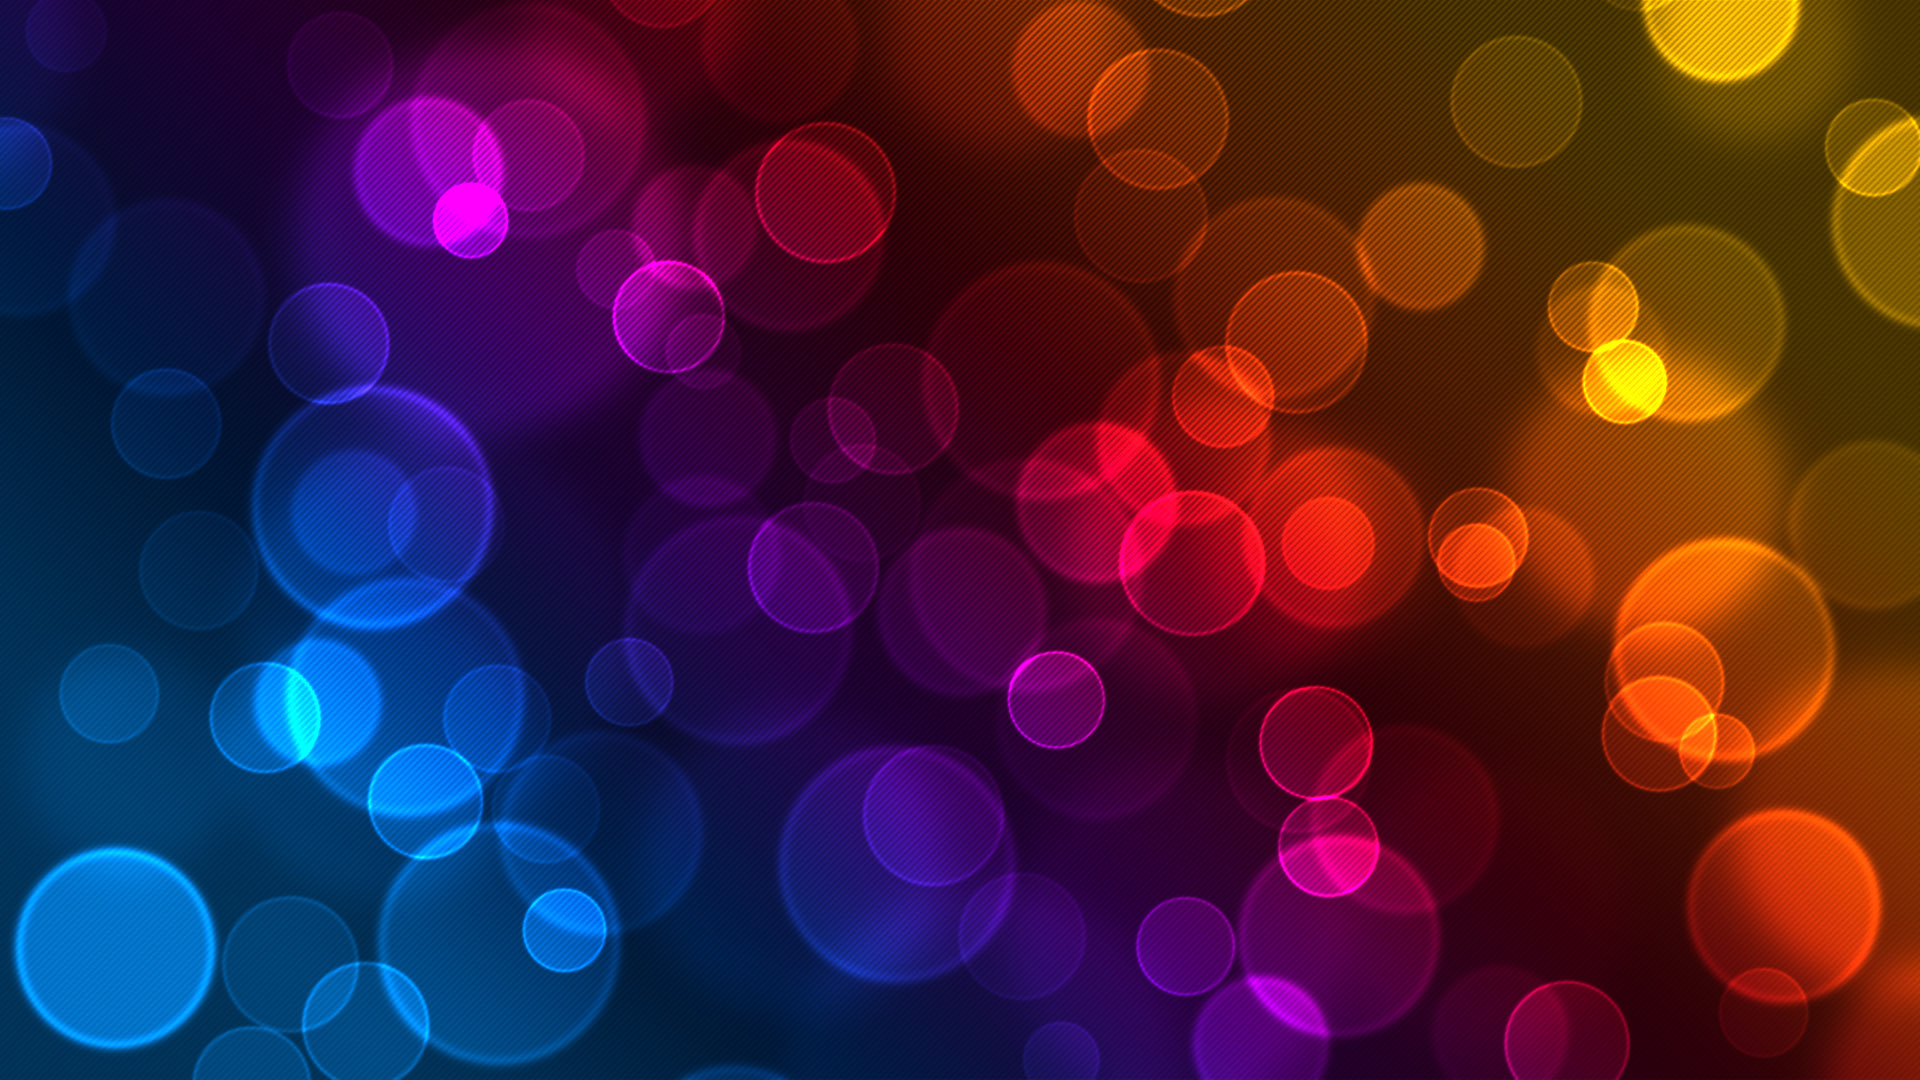 Blurry Circle By Daeva112 Customization Wallpaper Abstract